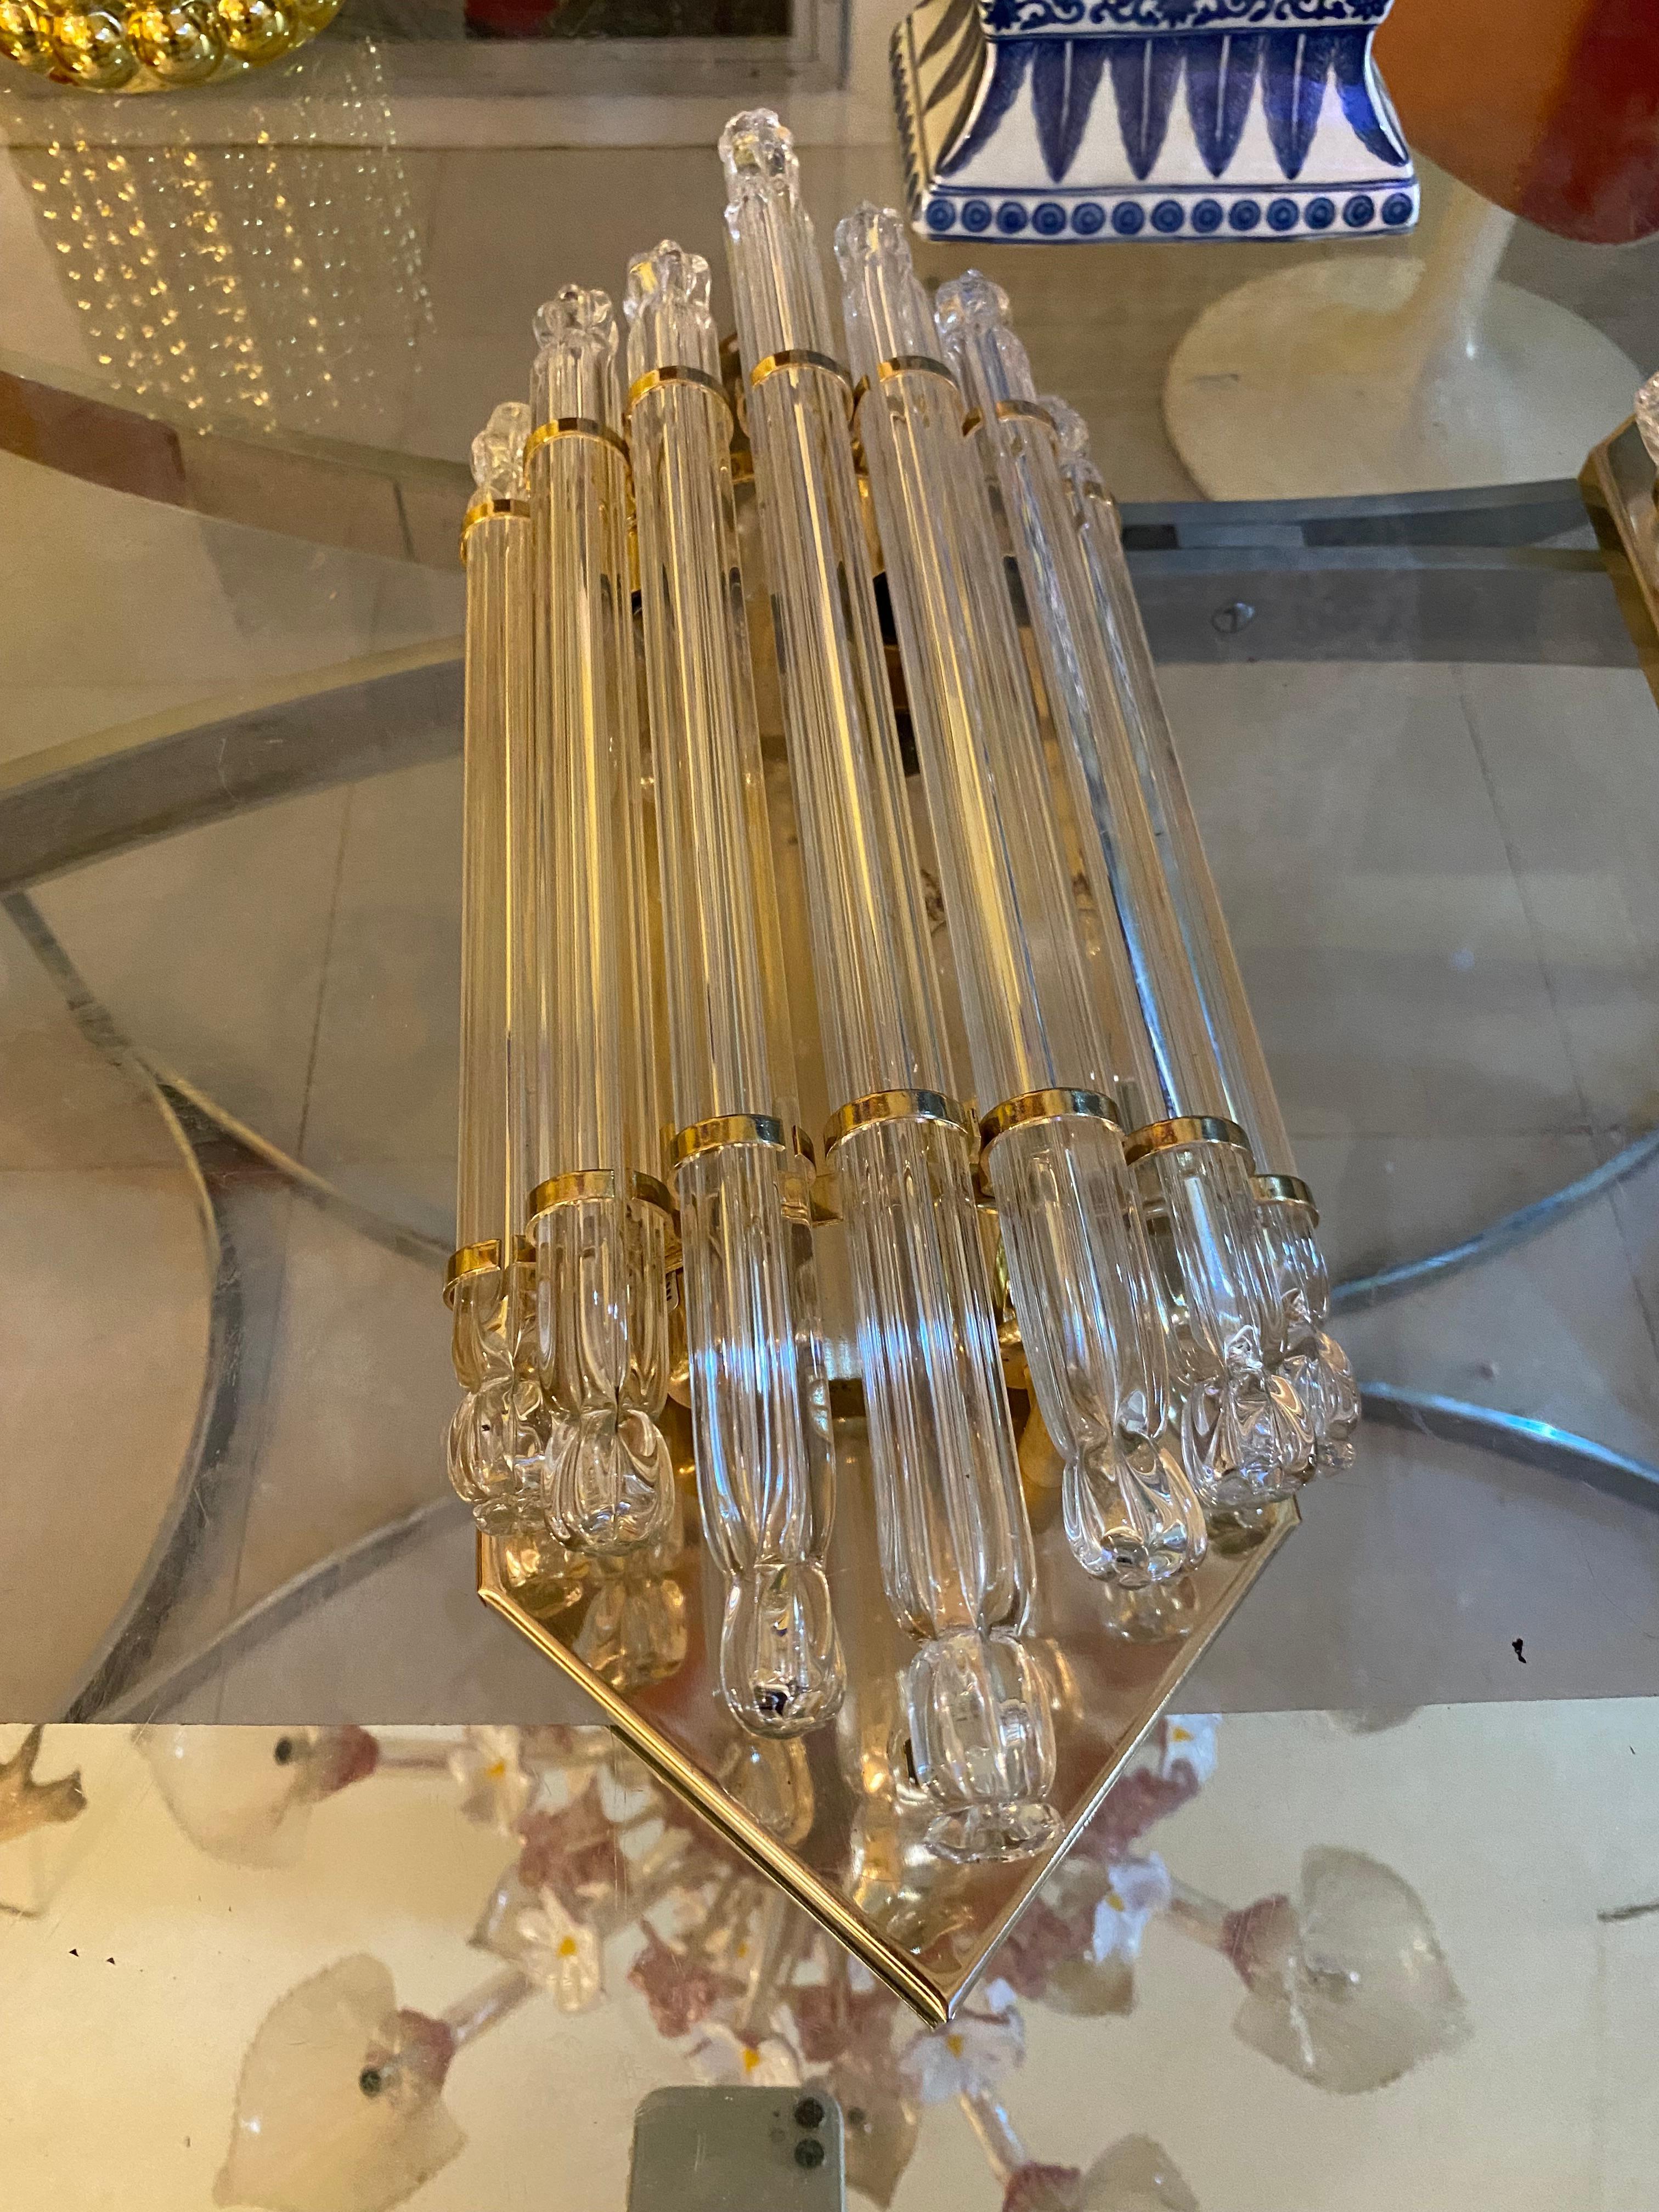 Venini wall lamp in Murano glass with iridium glass. The design and the quality of the glass make this piece the best in design.
This pair of sconces is in good condition.
Venini is an Italian company known for its high quality handcrafted